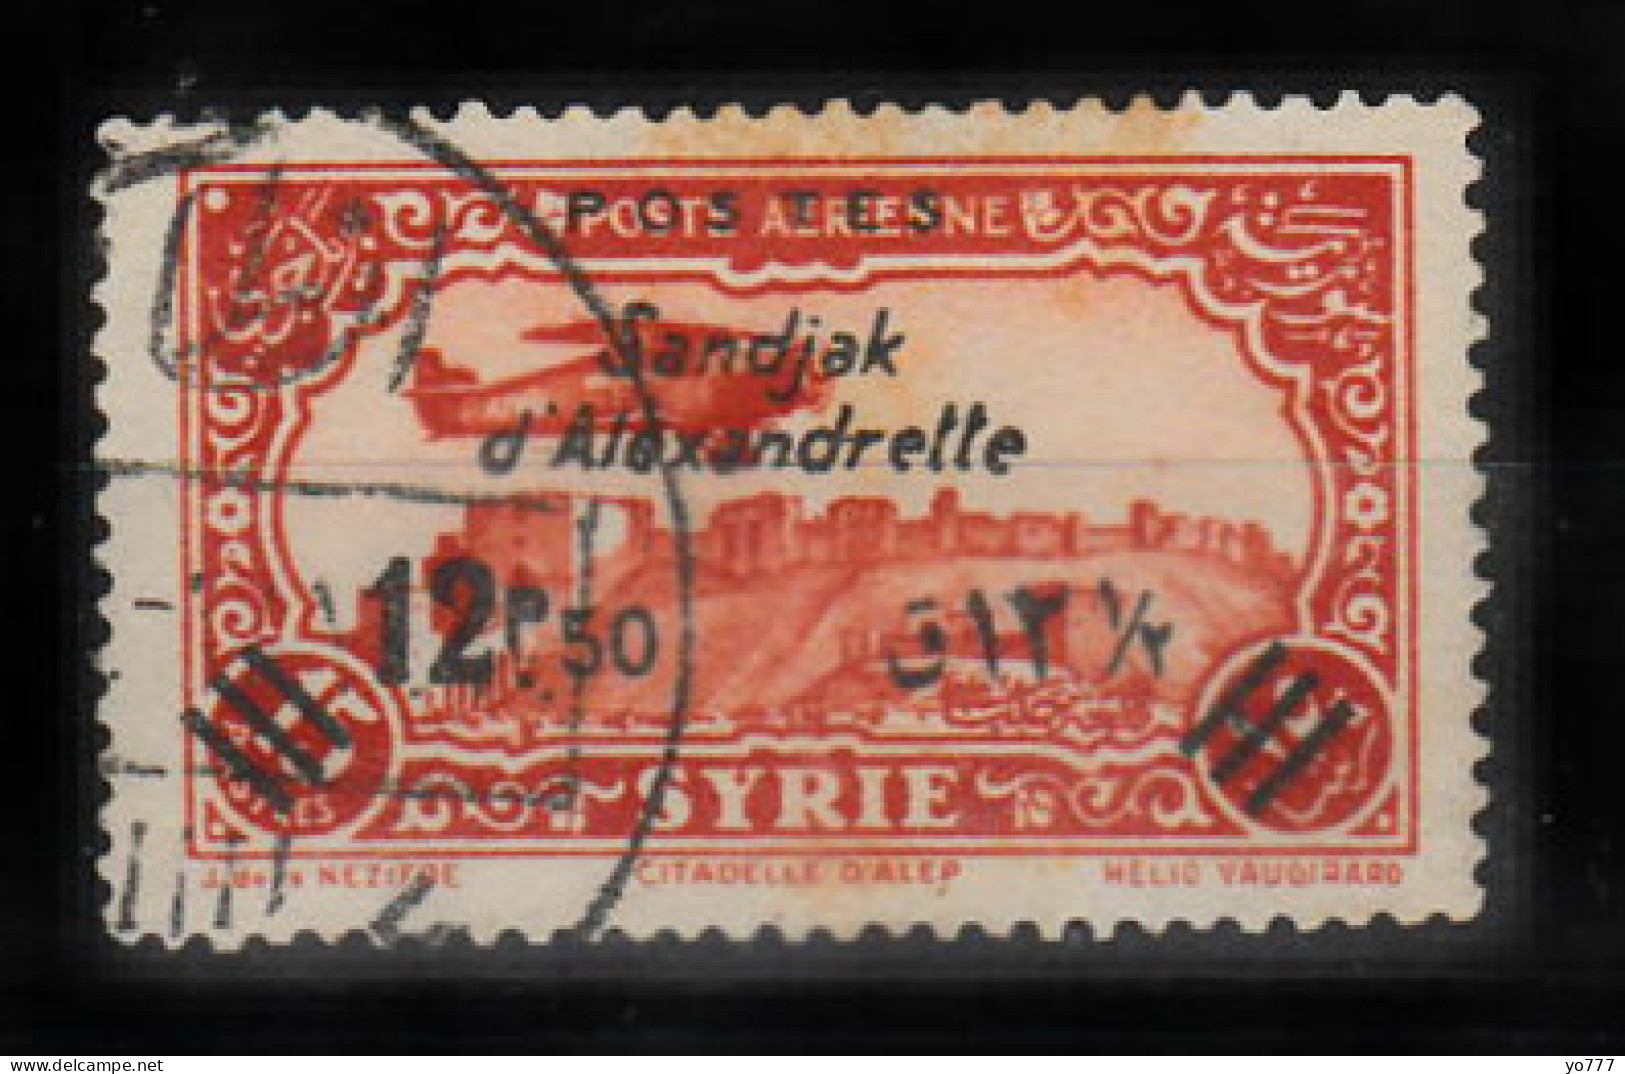 (H-012) 1938 HATAY STAMPS WITH BLACK SANDJAK D'ALEXANDRETTE SURCHARGE ON SYRIA POSTAGE AIRPOST STAMPS USED - 1934-39 Sandjak D'Alexandrette & Hatay